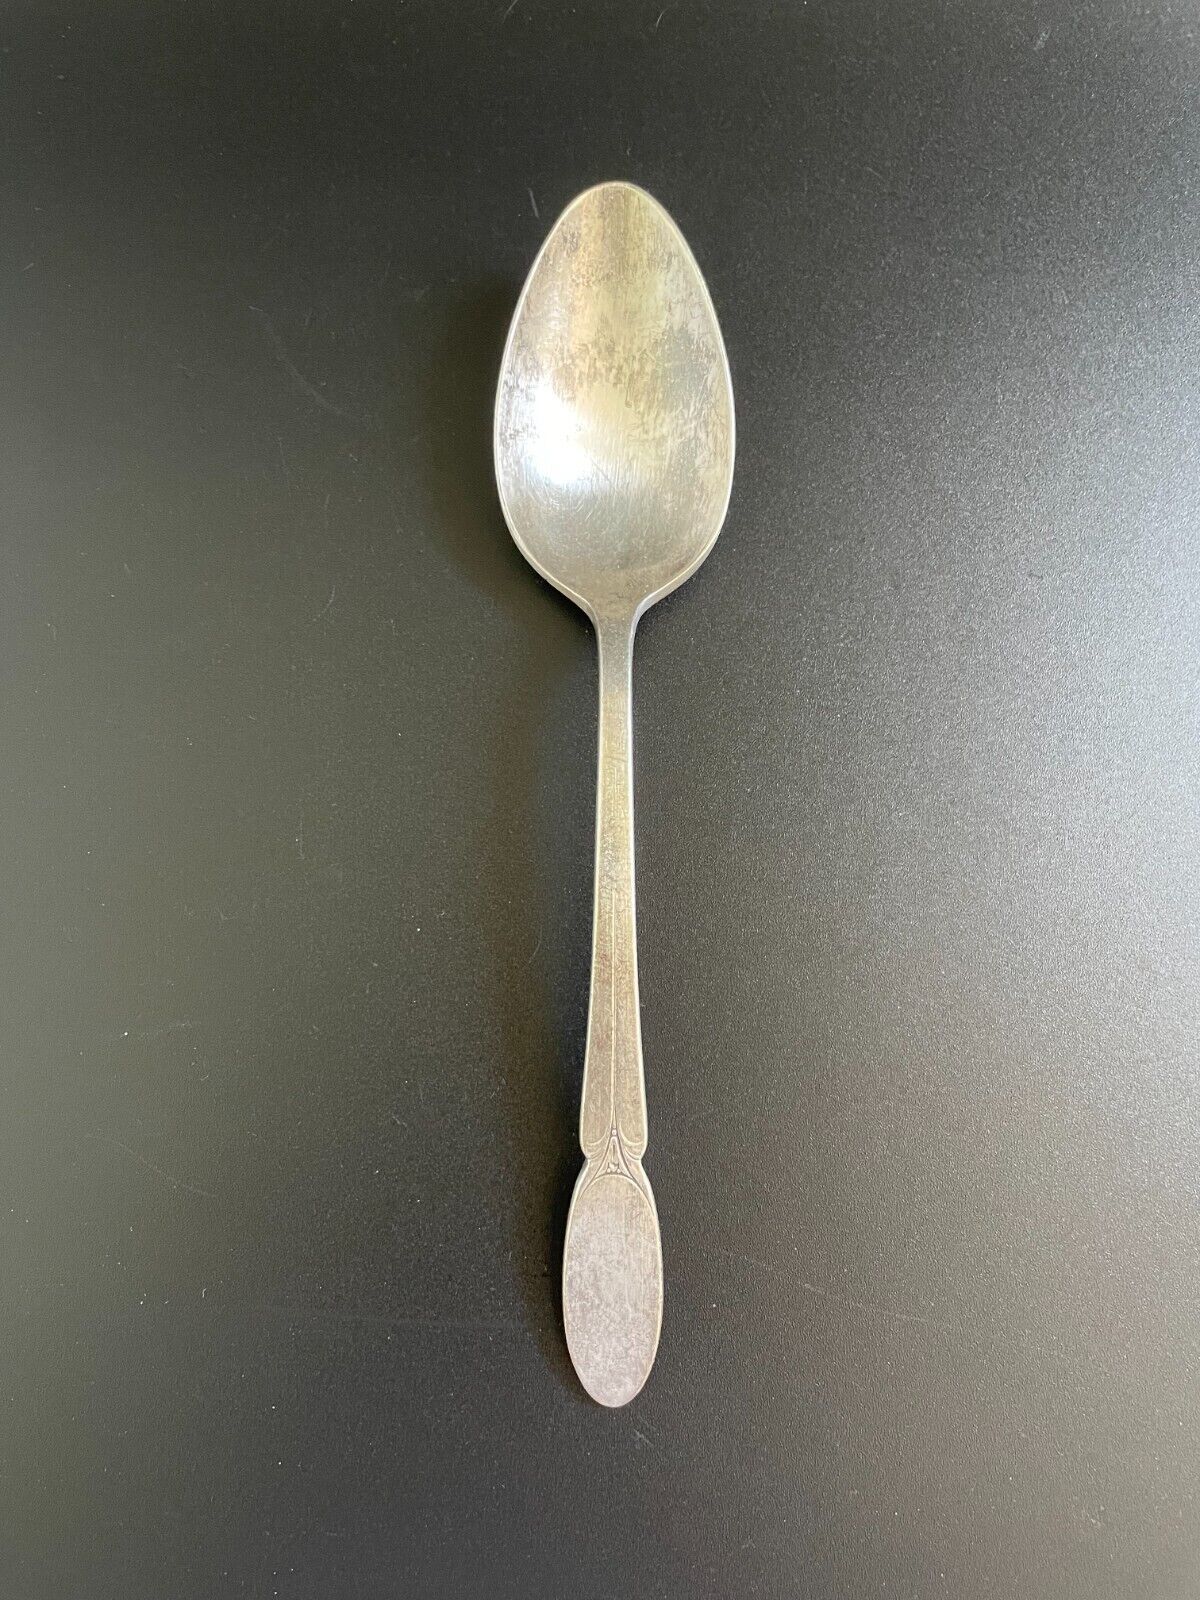 1847 Rogers Bros International Sylvia 1934 Silverplate 7⅜" Place Oval Soup Spoon - $9.95